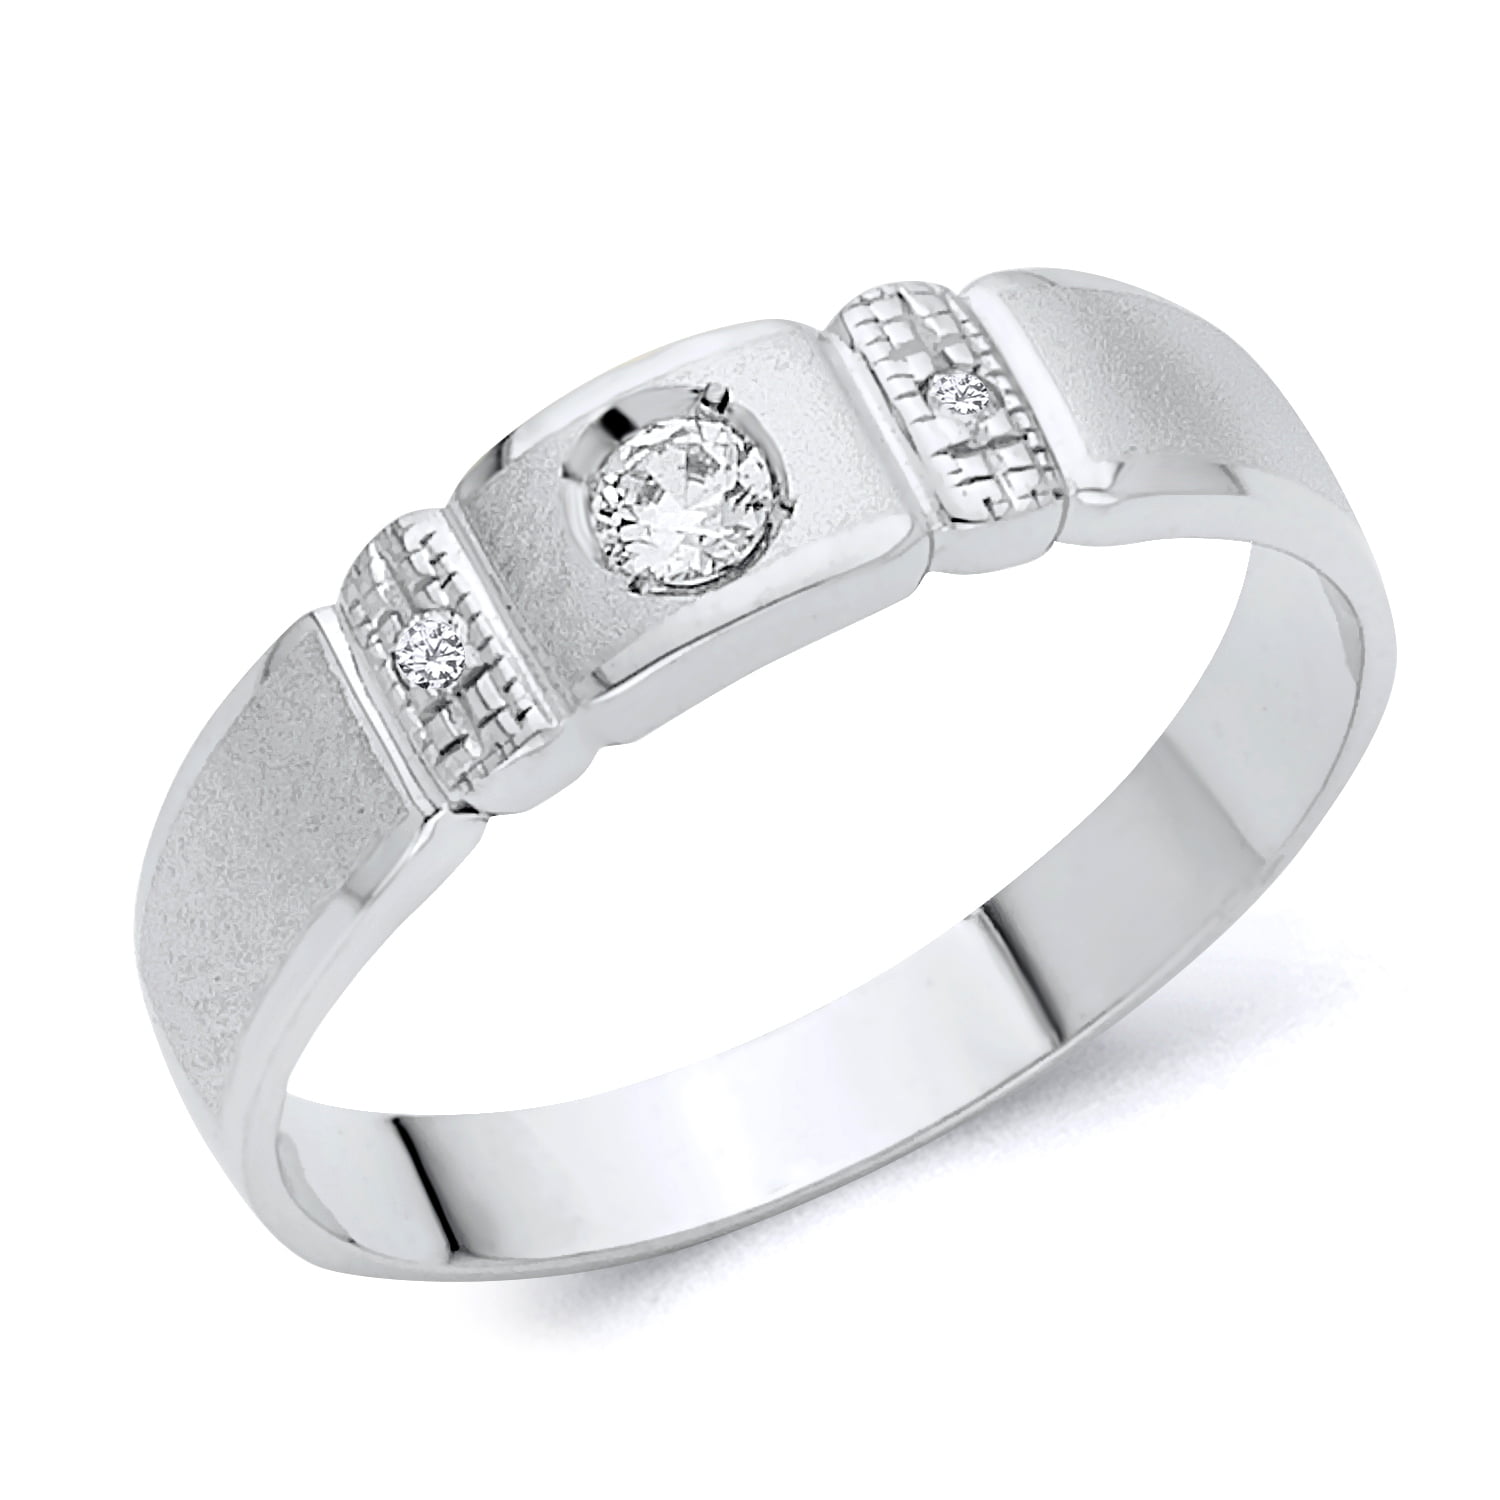 Wellingsale Mens Solid 14k White Gold CZ Cubic Zirconia Wedding Band 